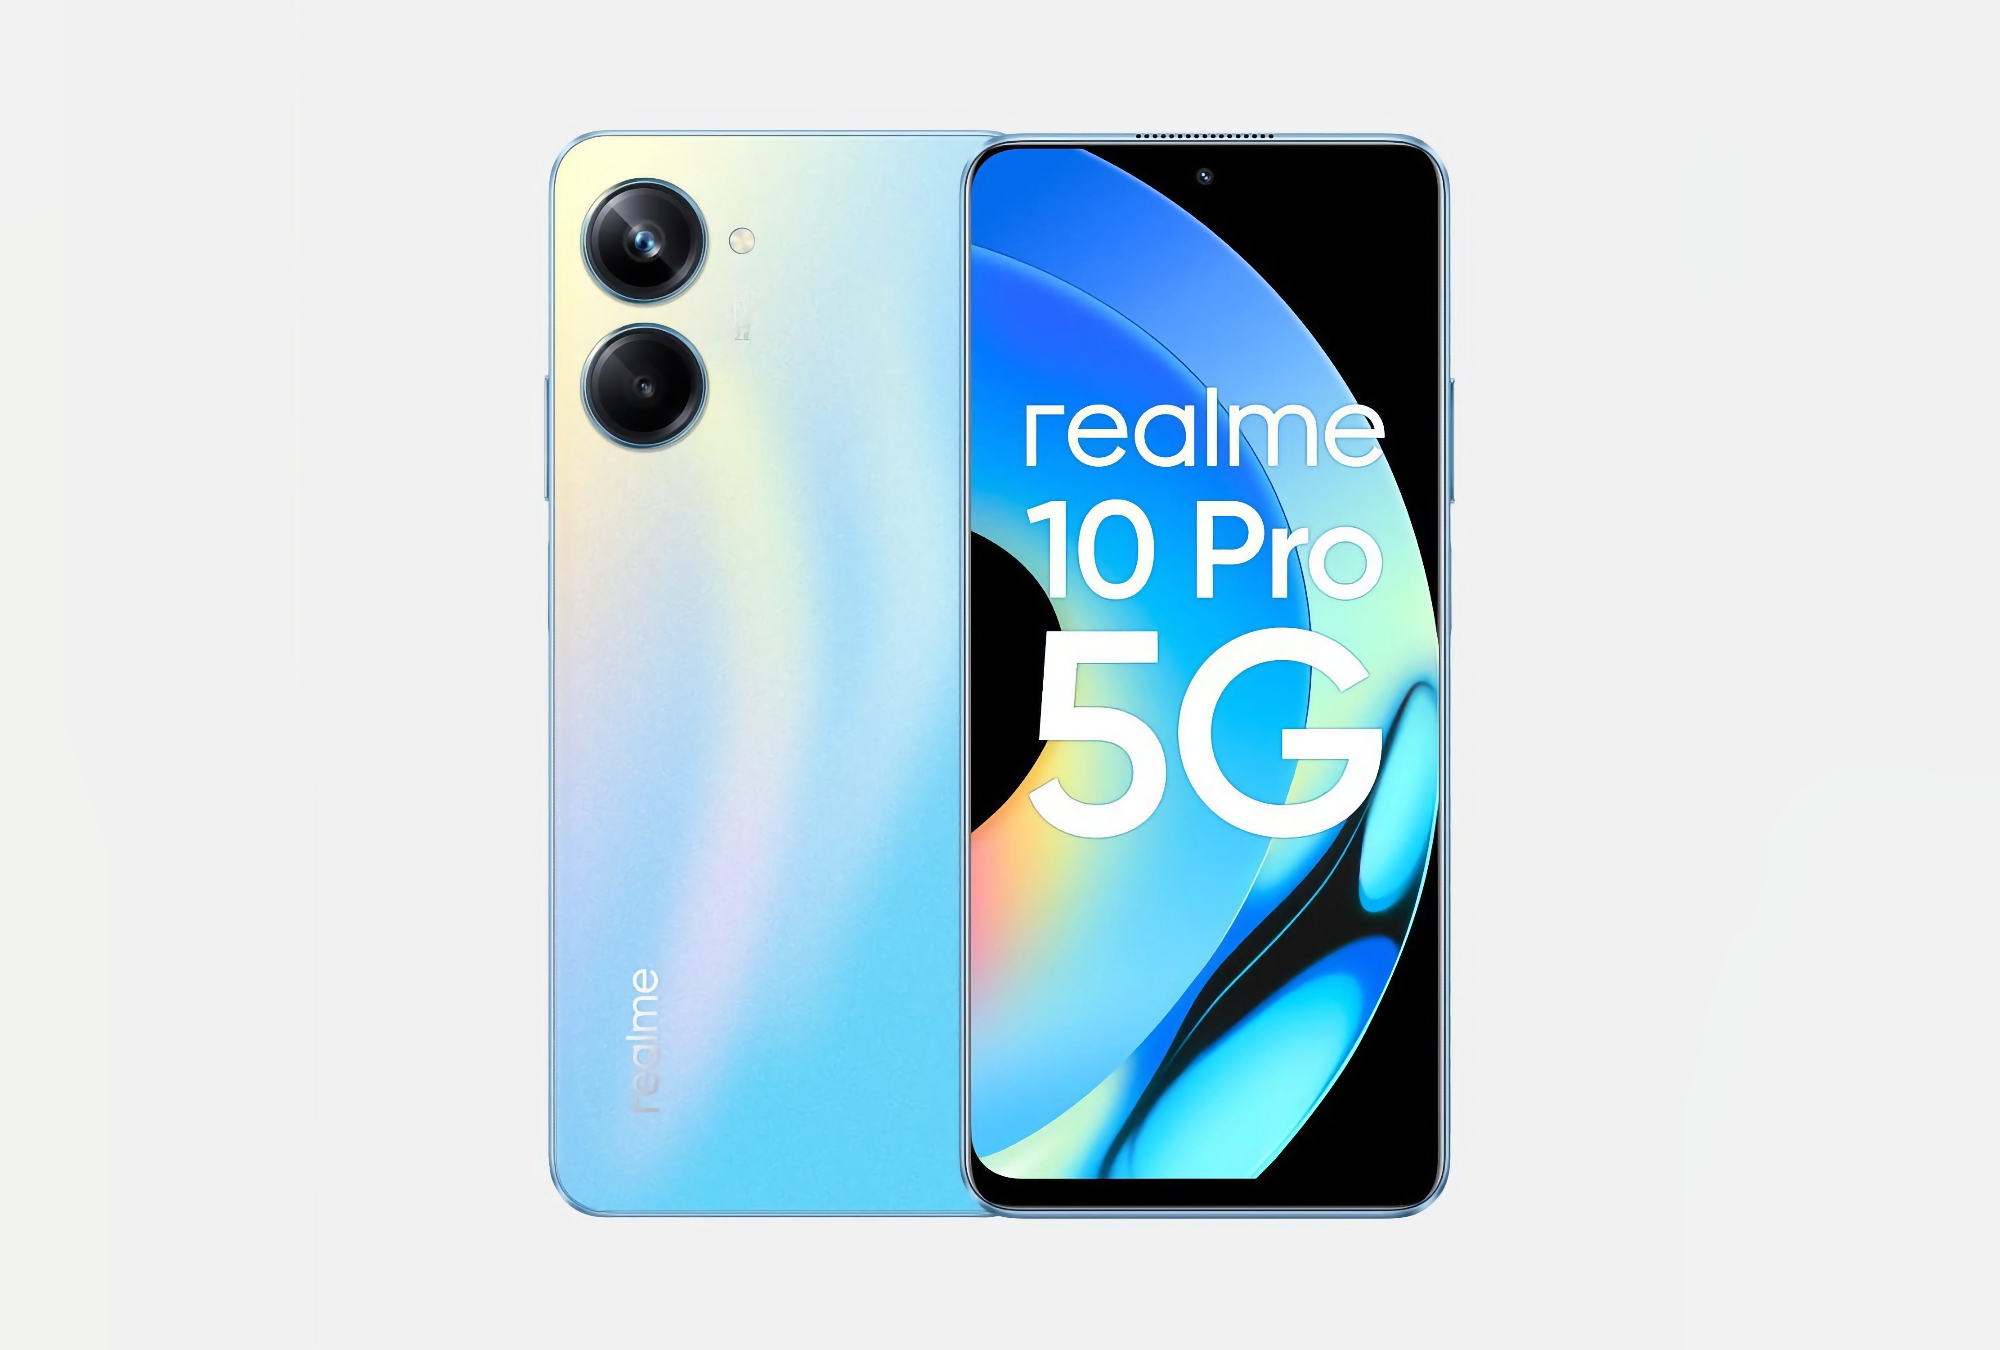 realme 10 Pro receives an important security update